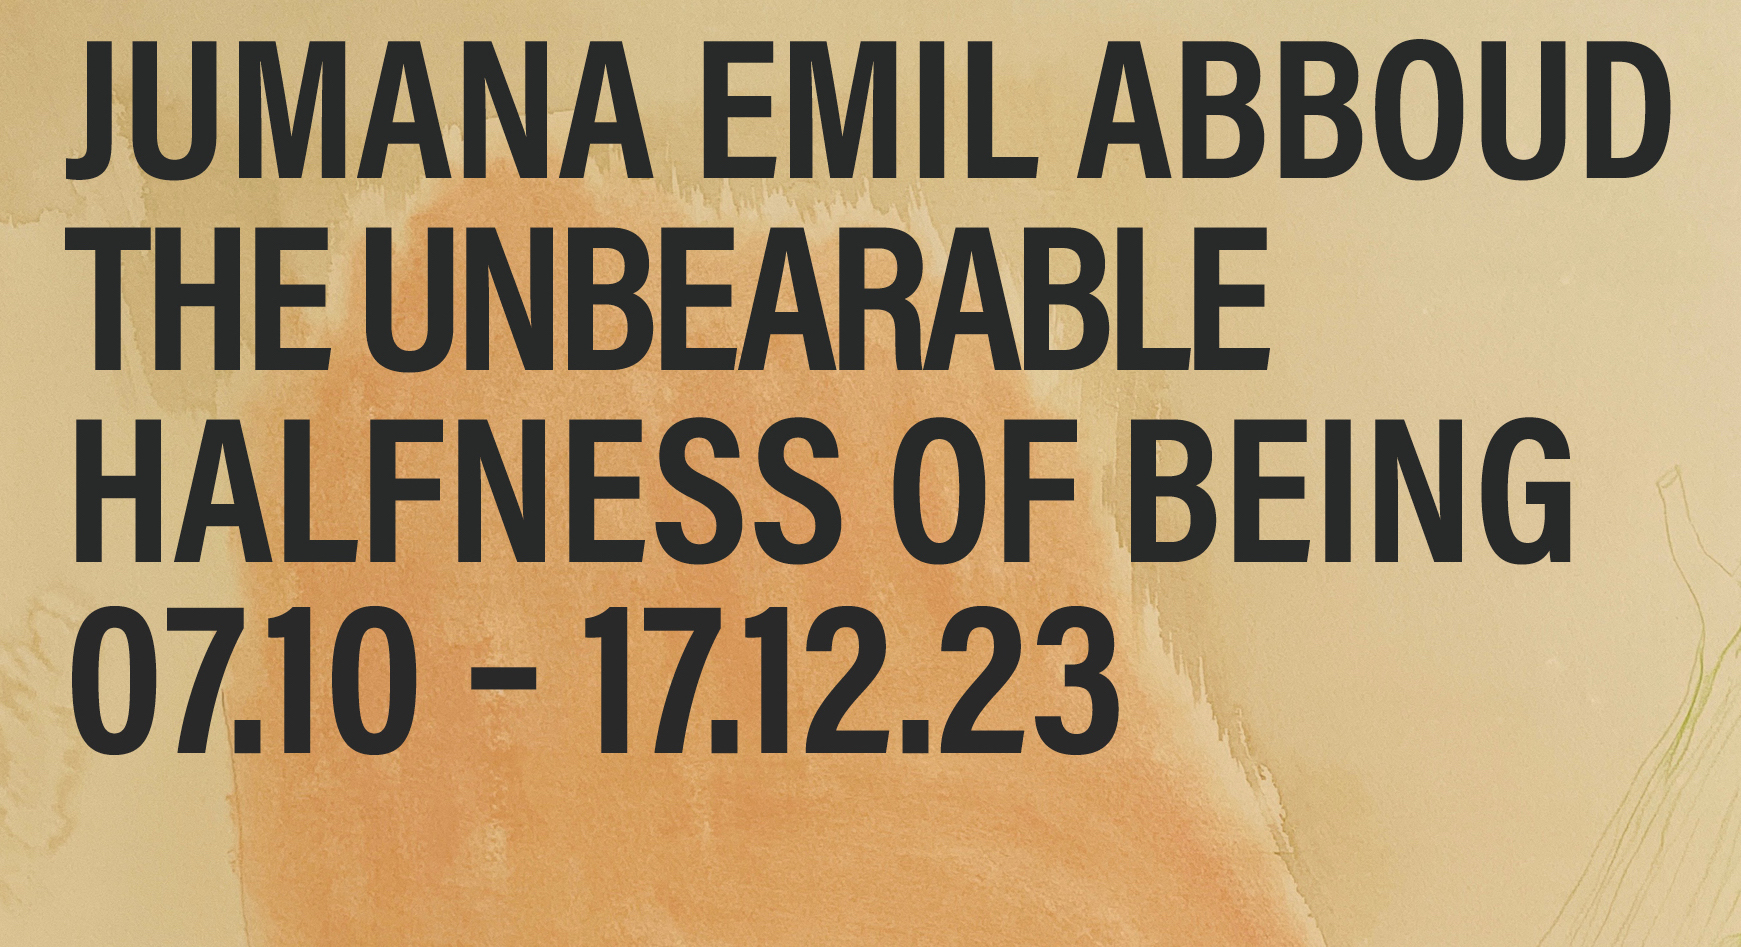 A pale coloured image, with a hand-drawn figure in the bottom left. With bold black text reading Jumana Emil Abboud, The Unbearable Halfness of Being, 7 October to 17 December 2023